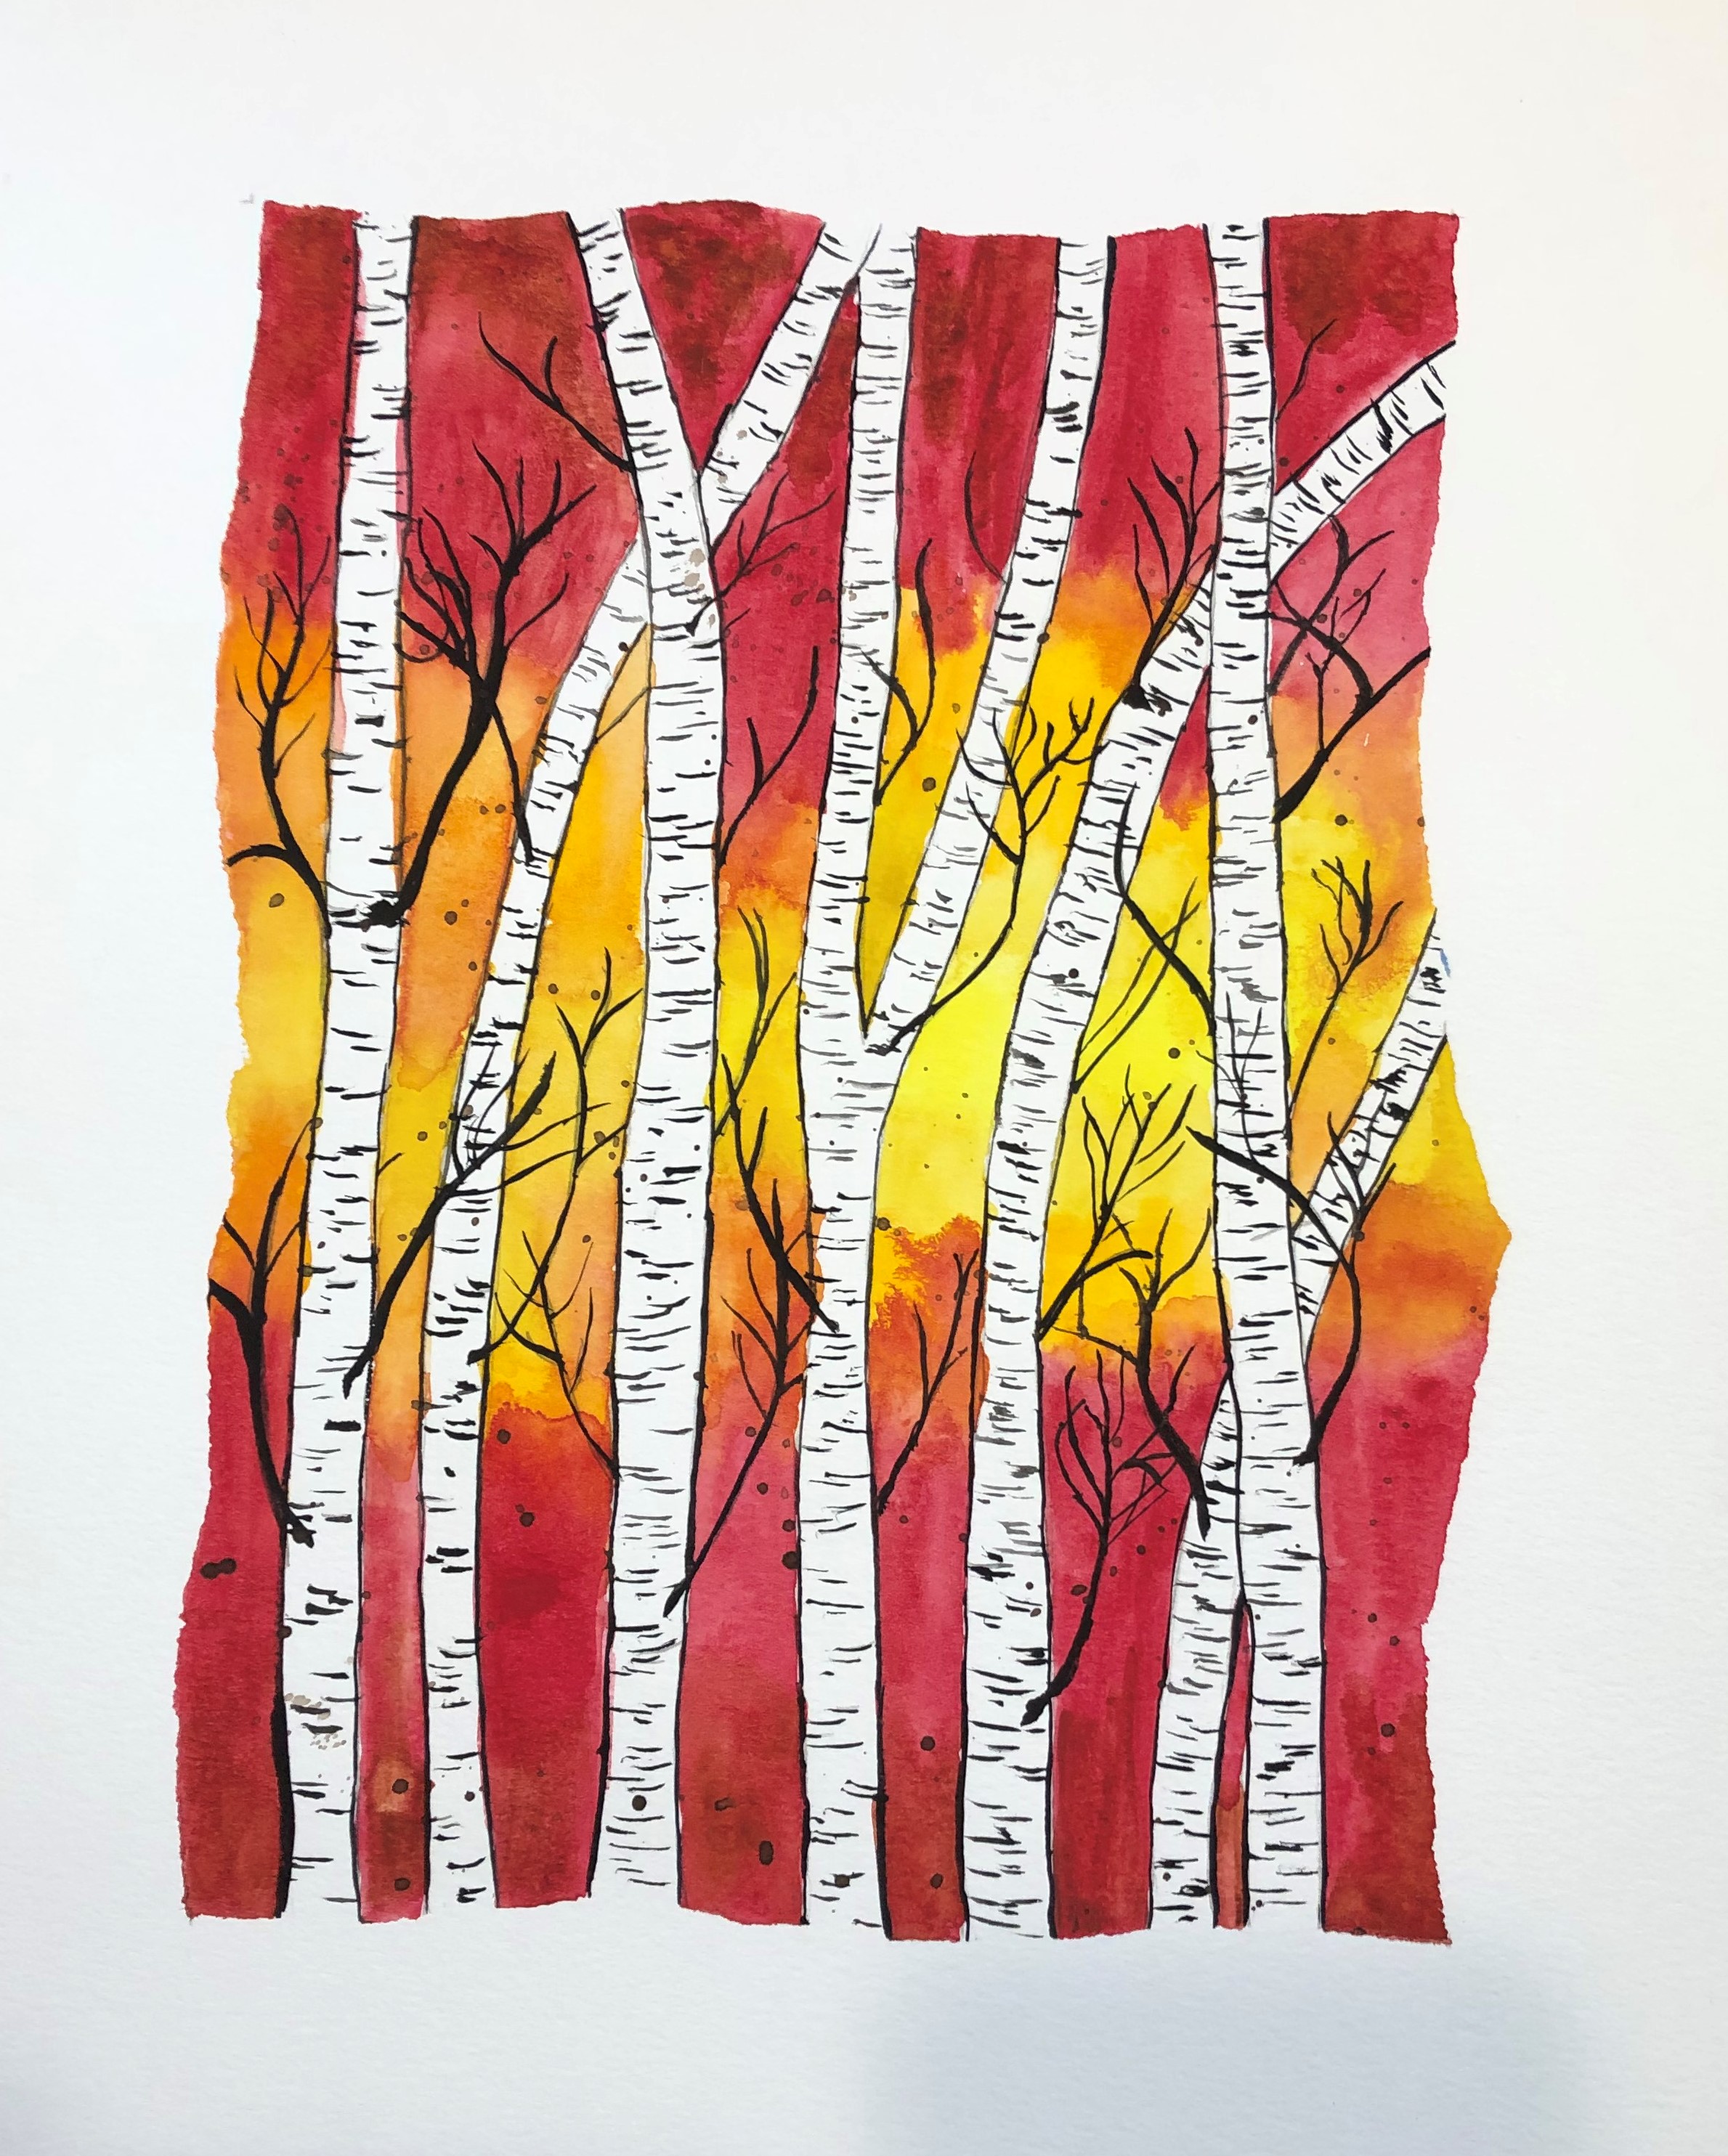 Watercolor painting of tree trunks on a red, orange, and yellow background